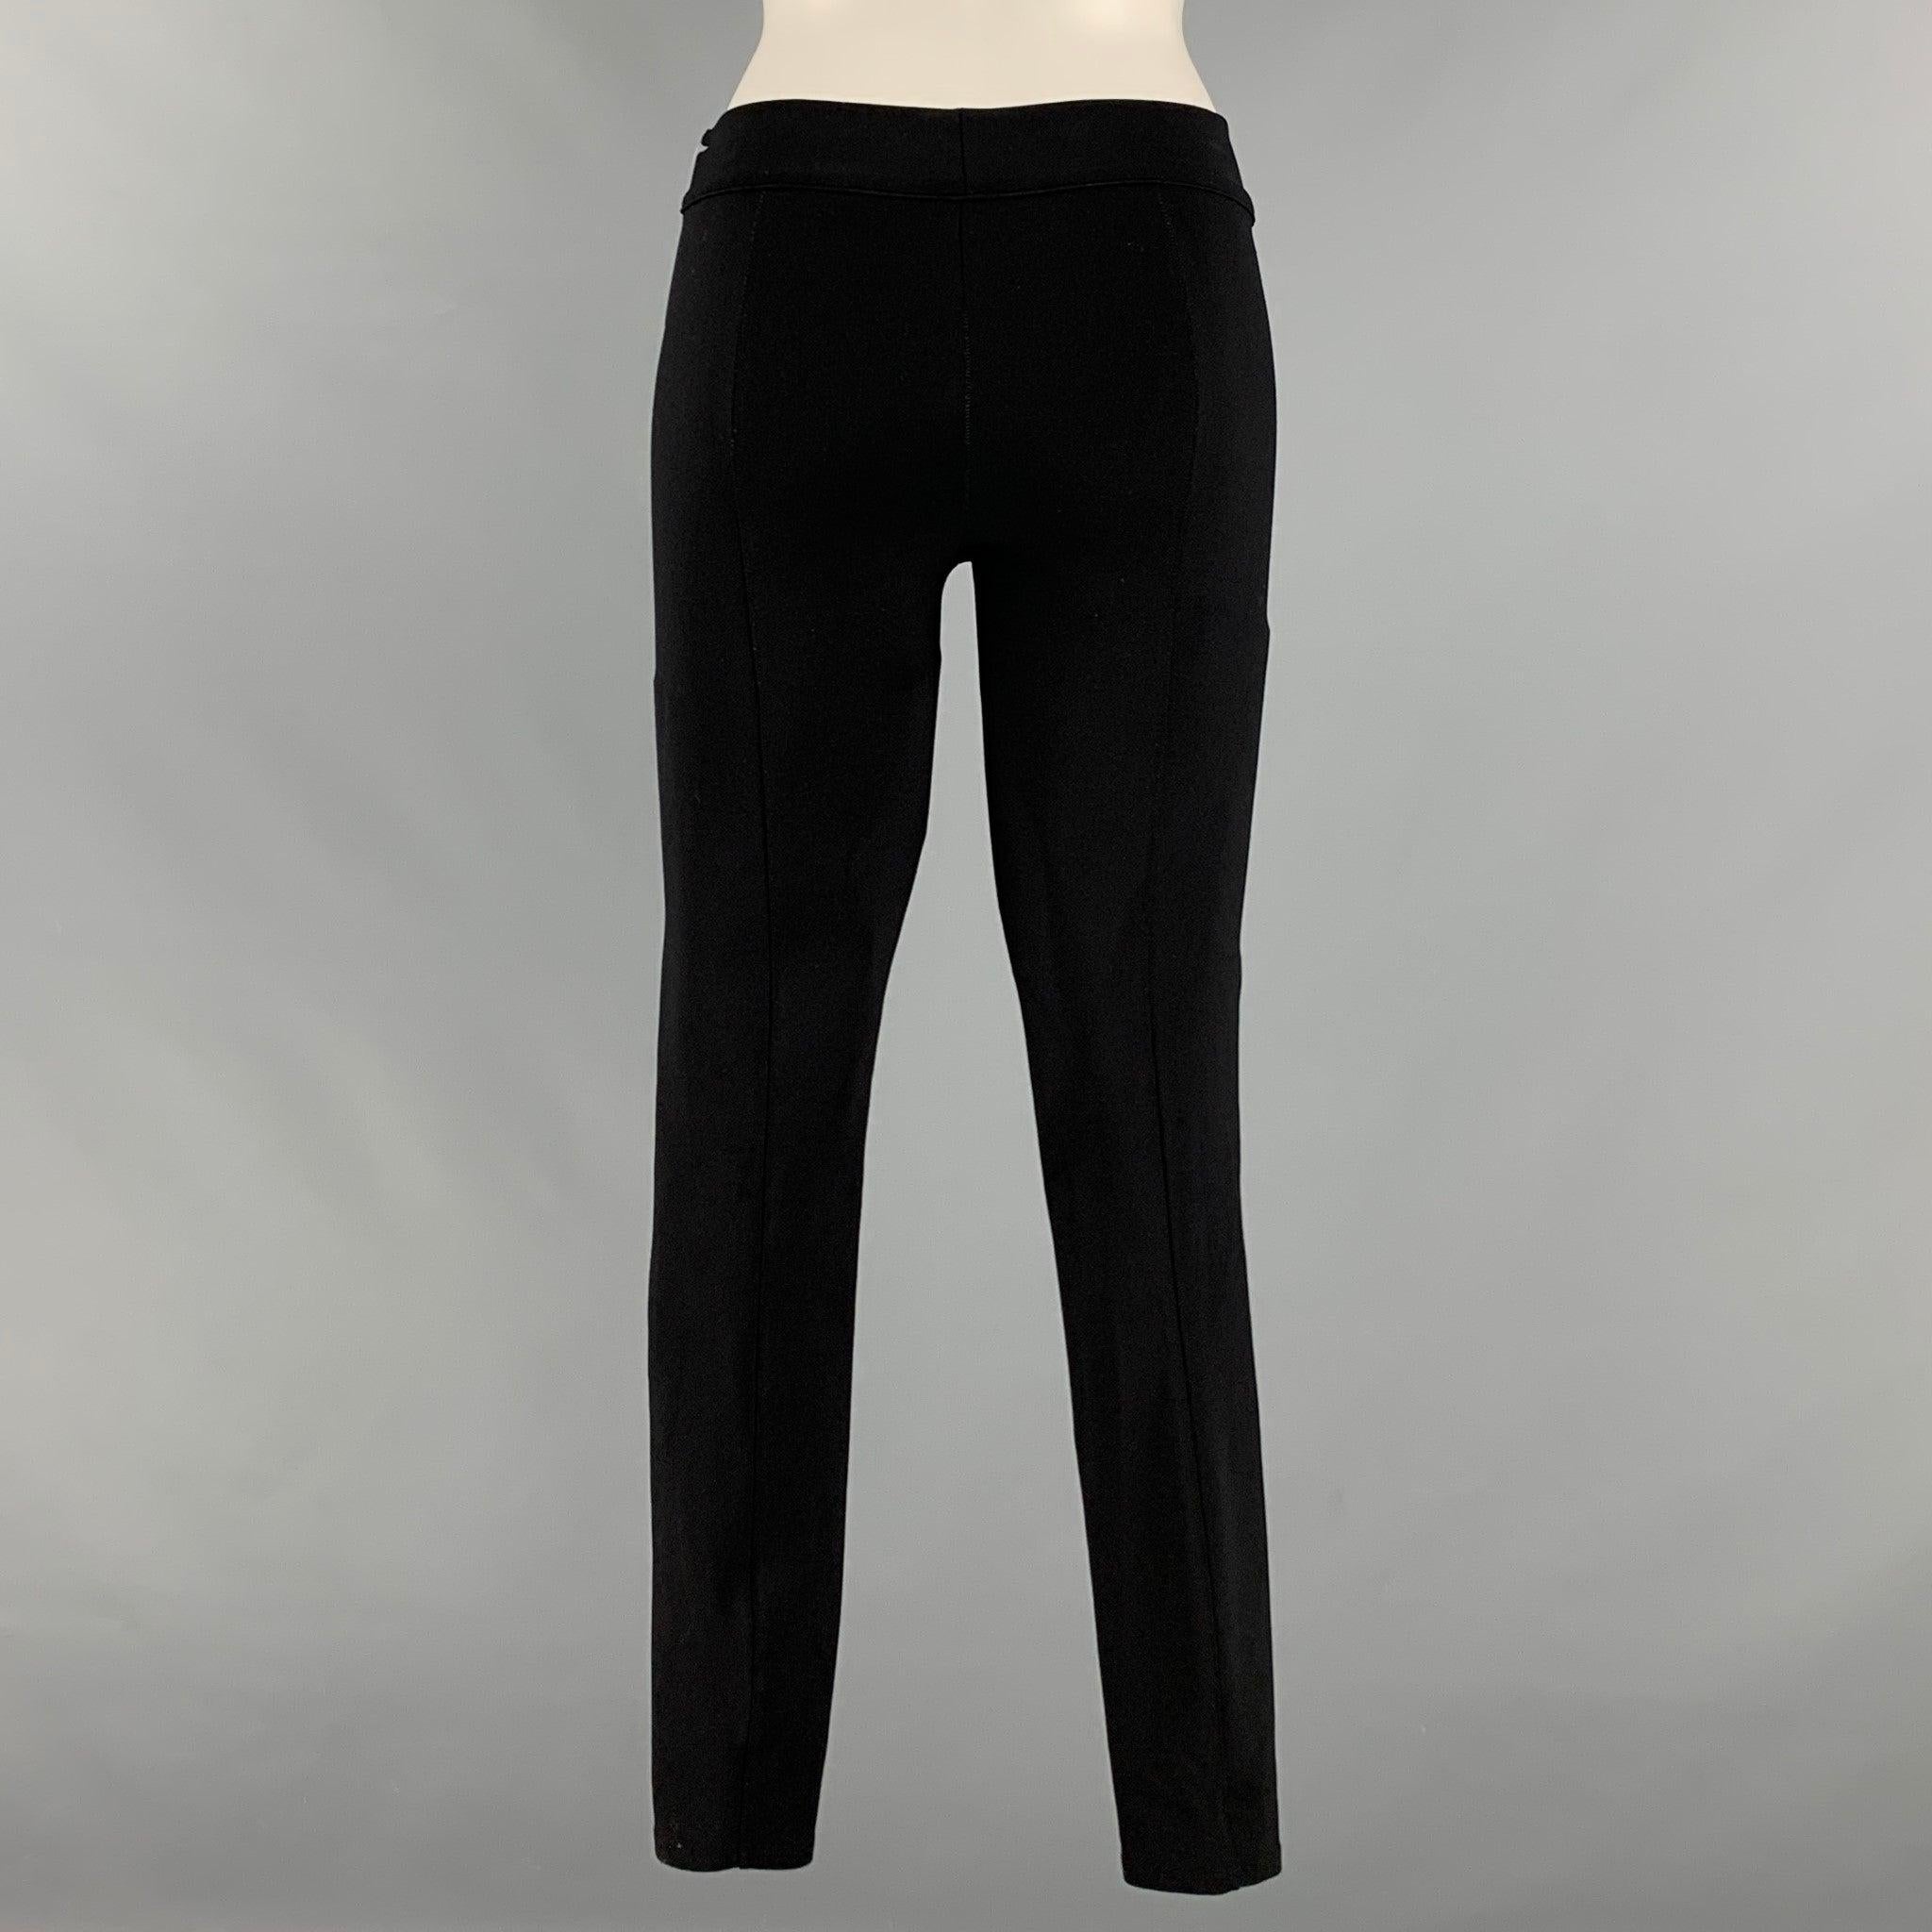 THE ROW Size S Black Nylon Blend Elastic Waistband Leggings In Excellent Condition For Sale In San Francisco, CA